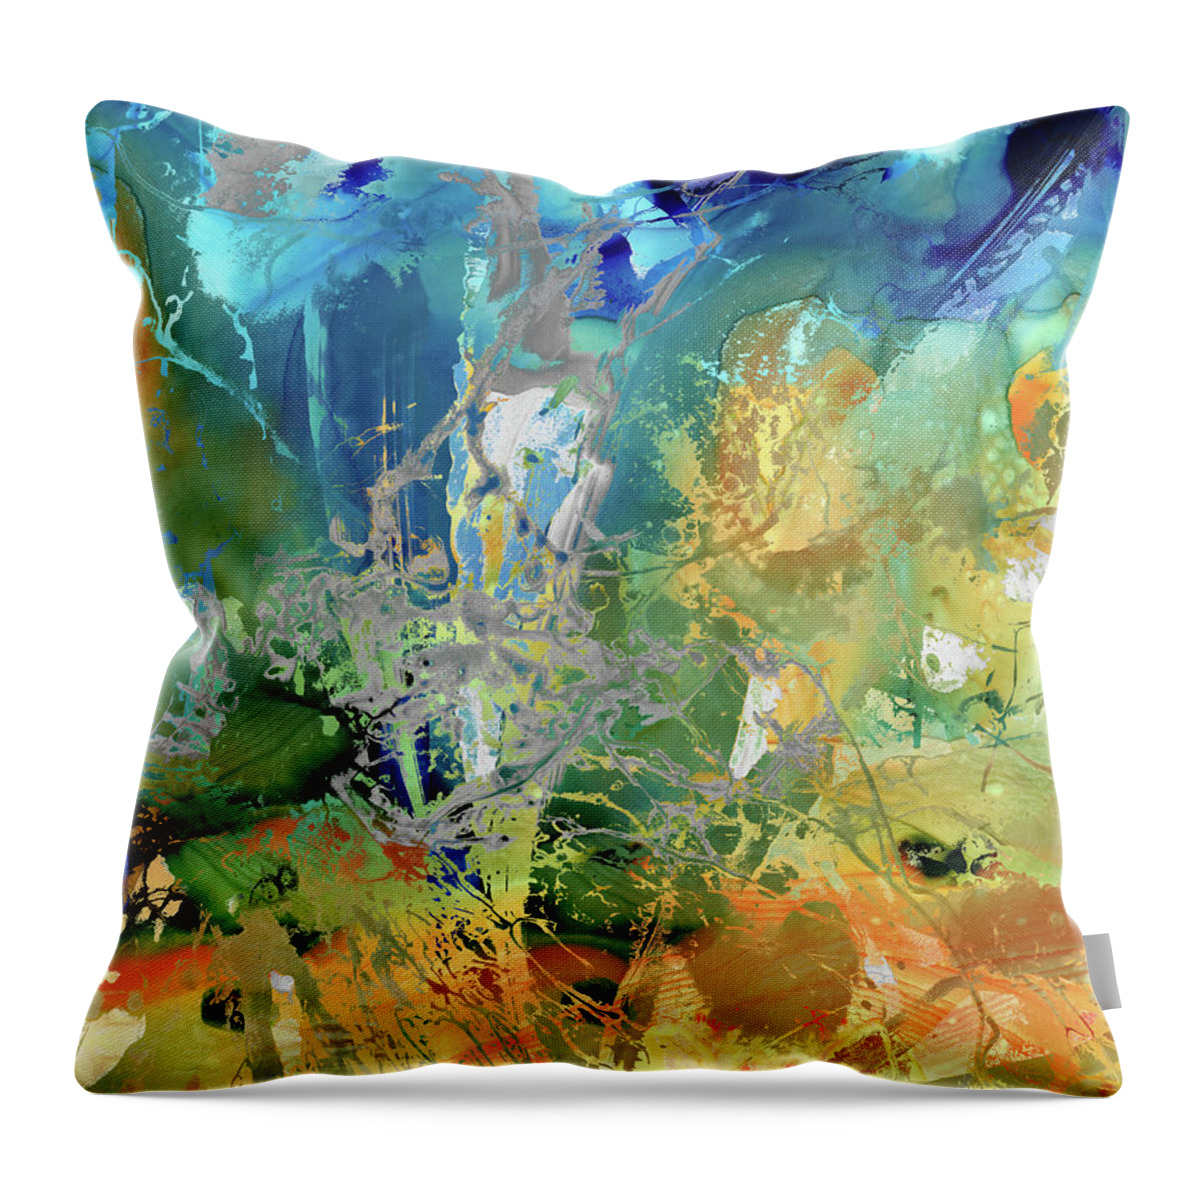 Blue Throw Pillow featuring the painting Modern Abstract Art - In Good Taste - Sharon Cummings by Sharon Cummings